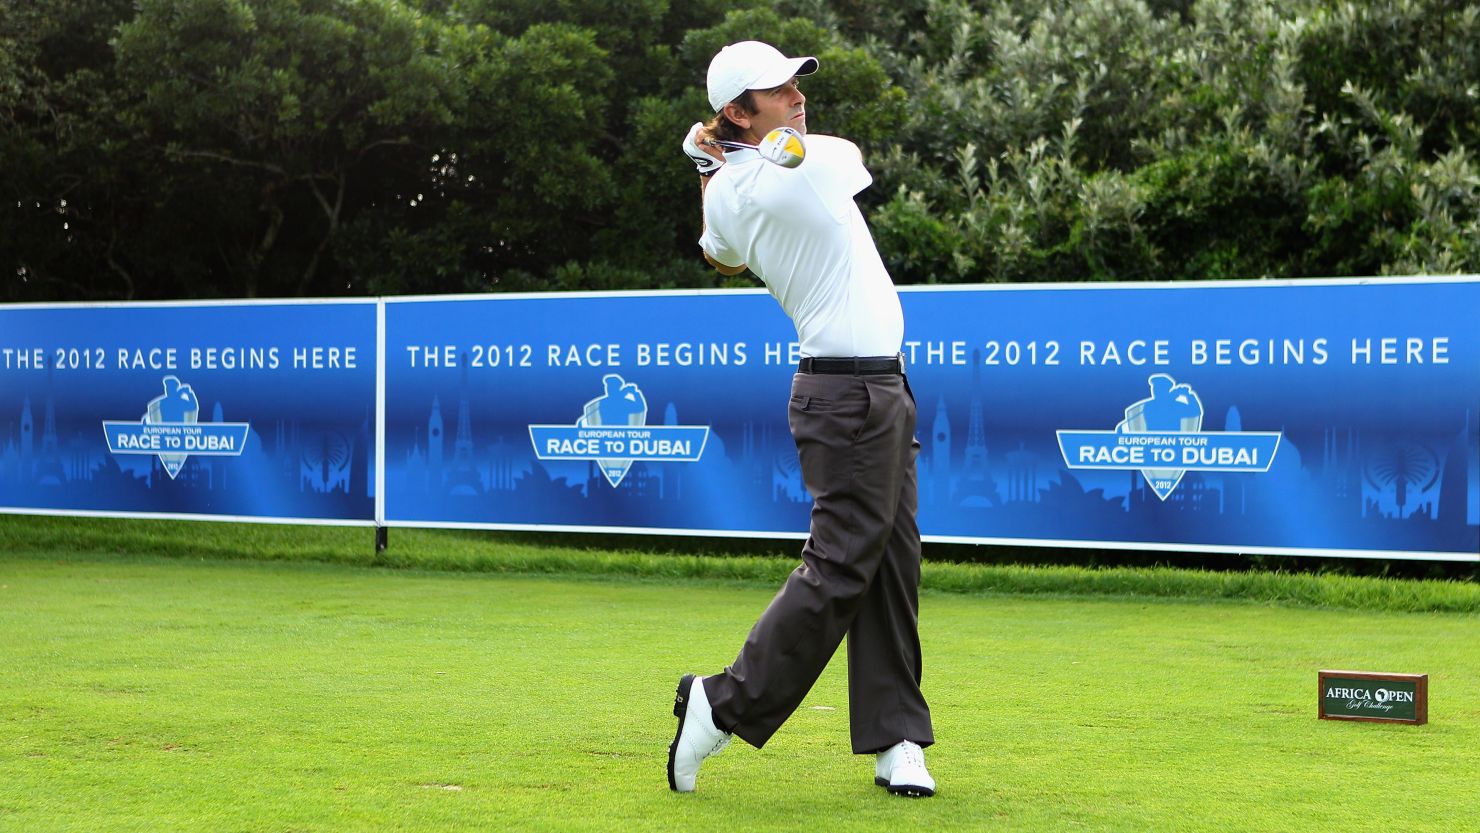 Thomas Aiken has started the 2012 Race to Dubai in fine form with an opening 64 at the Africa Open.